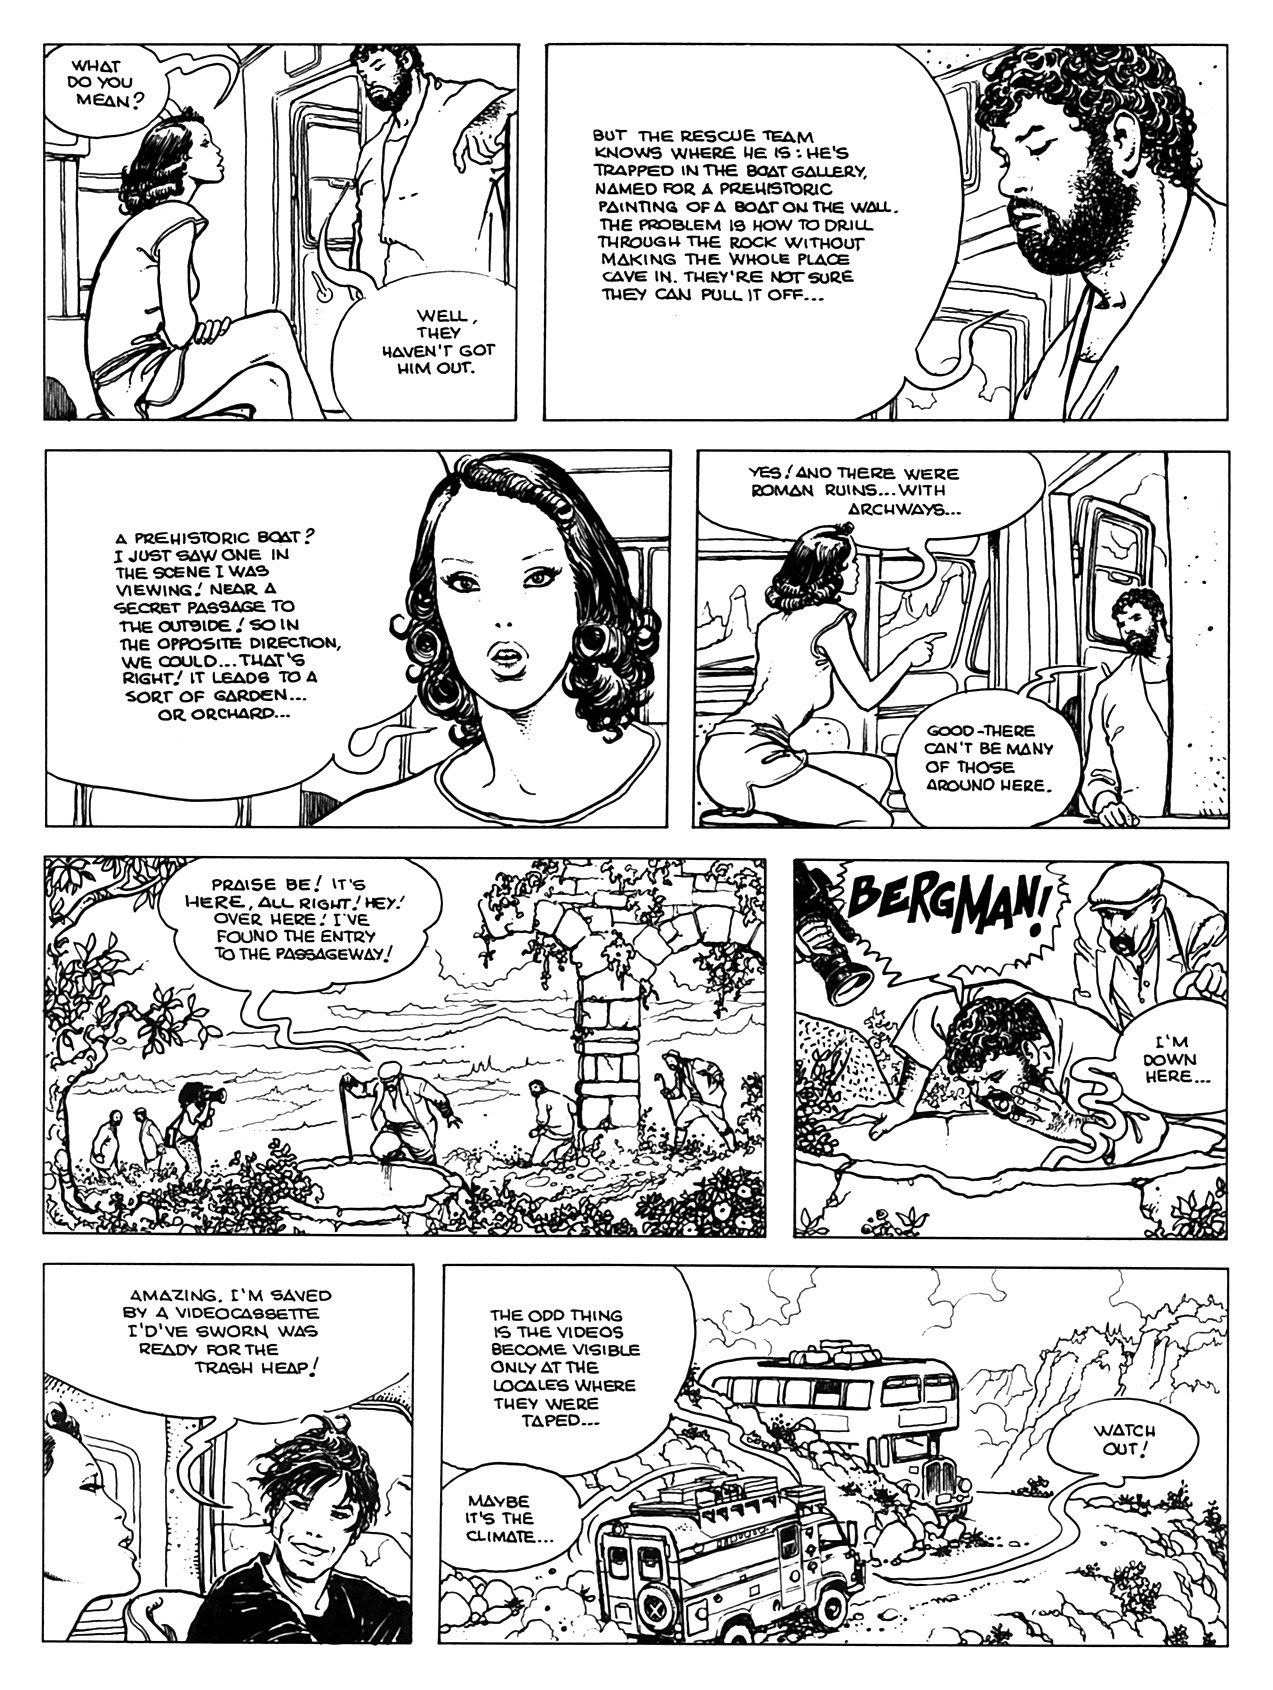 Read online Perchance to dream - The Indian adventures of Giuseppe Bergman comic -  Issue # TPB - 56